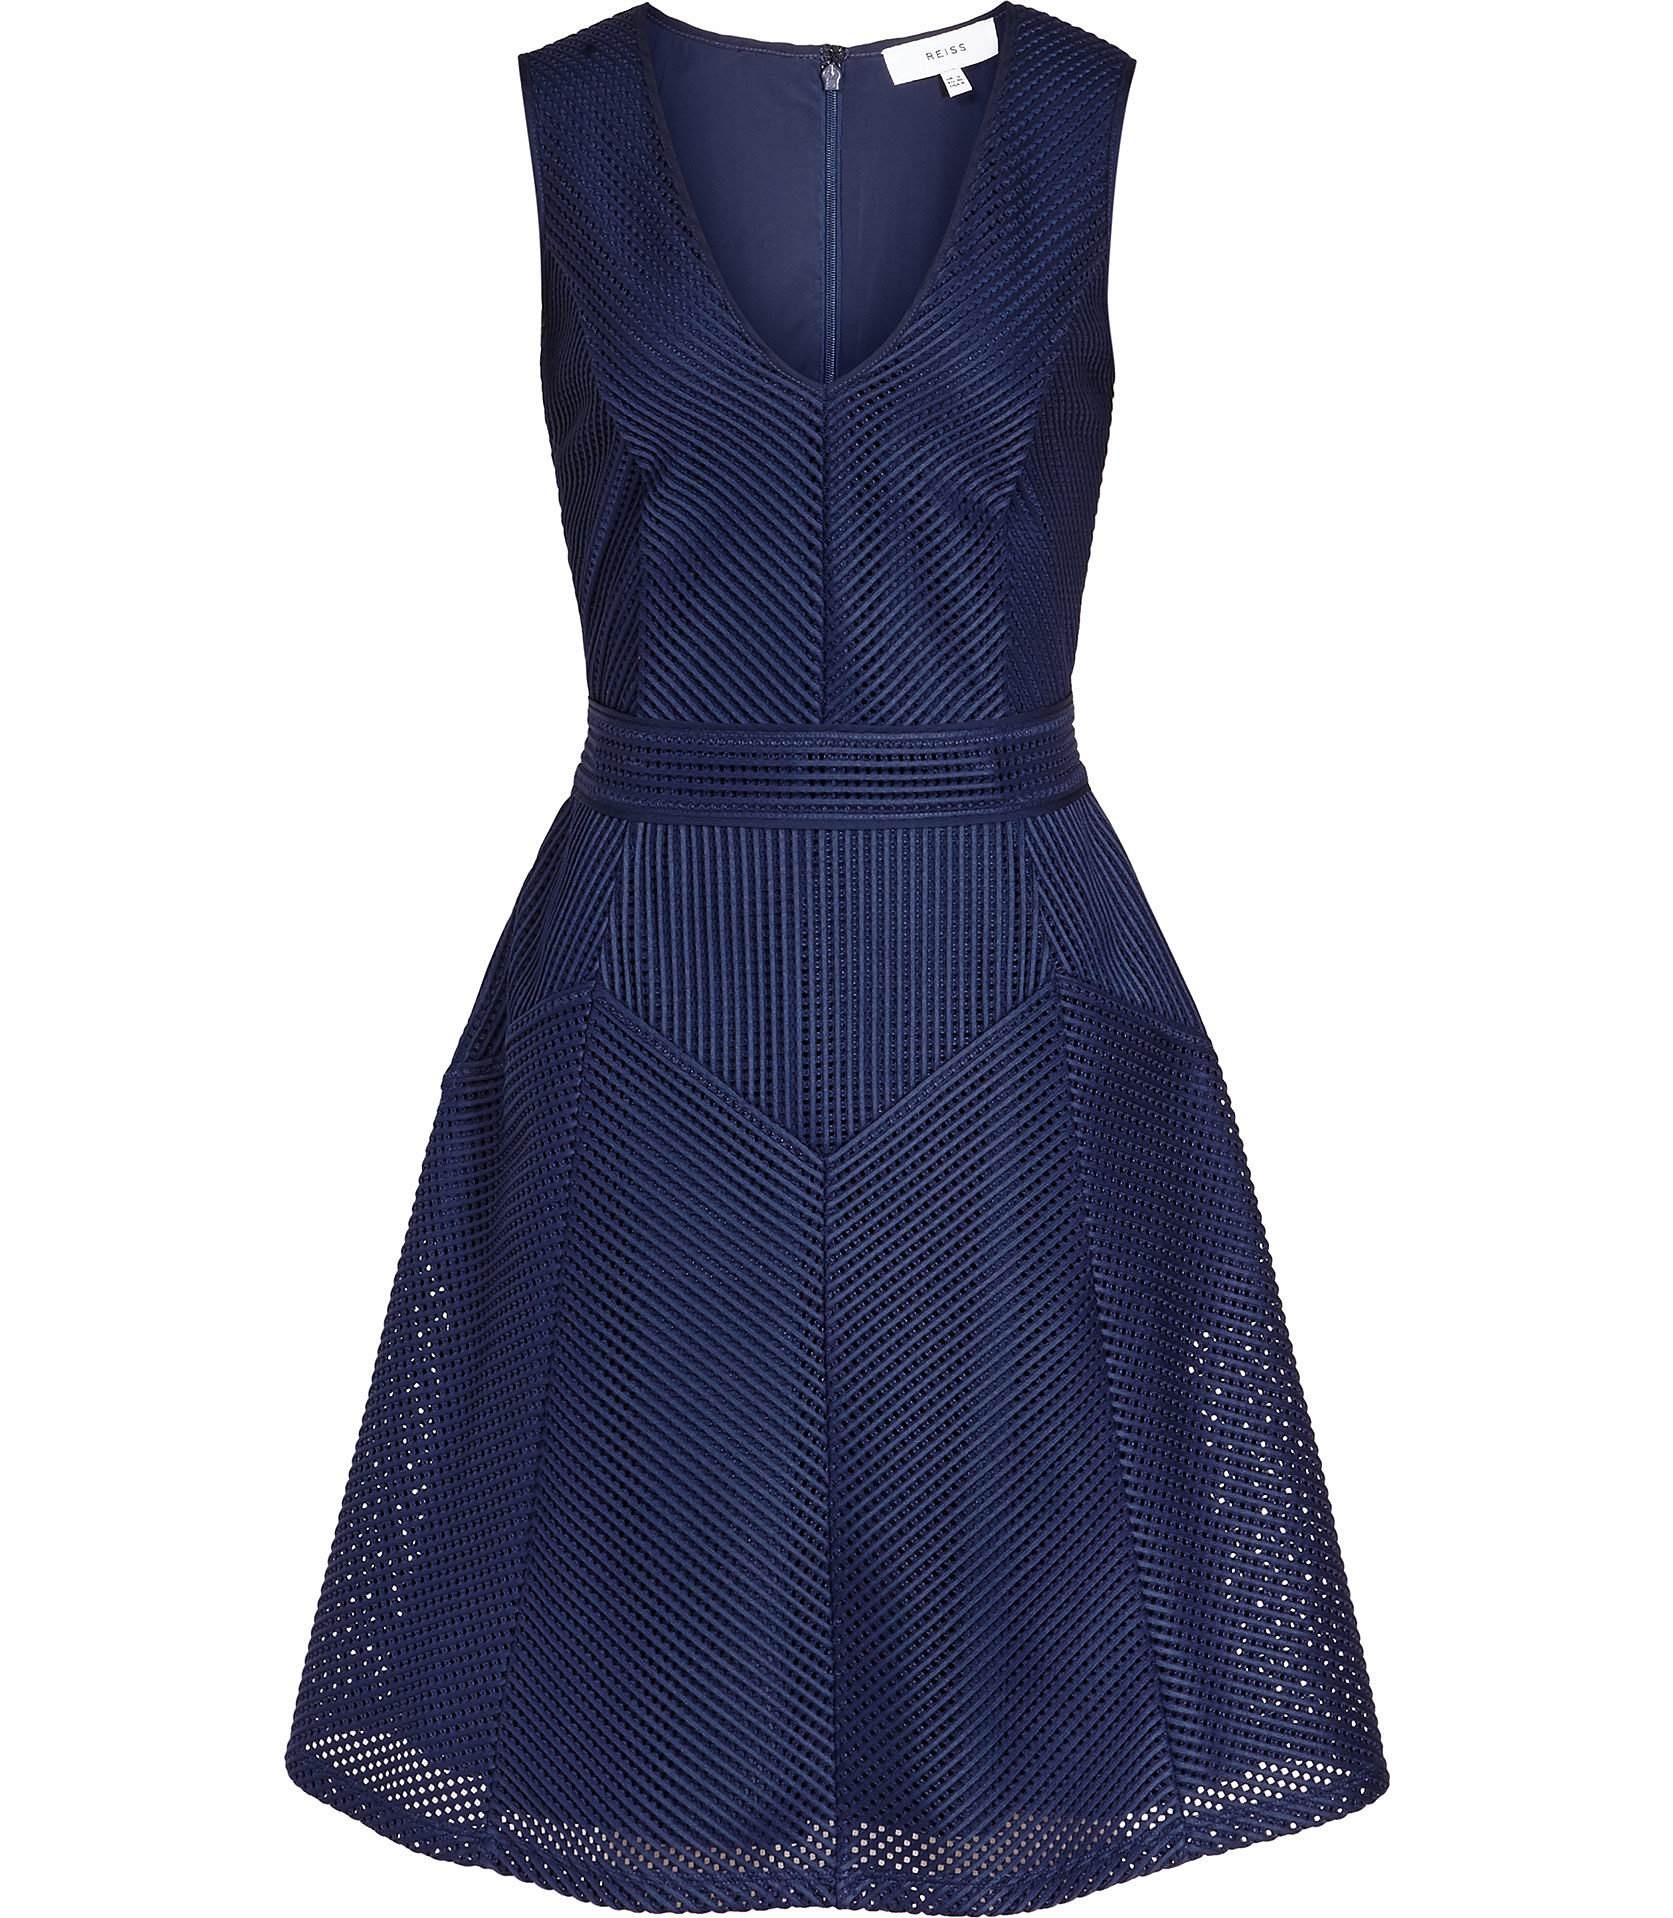 Reiss Topaz Royal Blue Textured Fit And Flare Dress 29802331